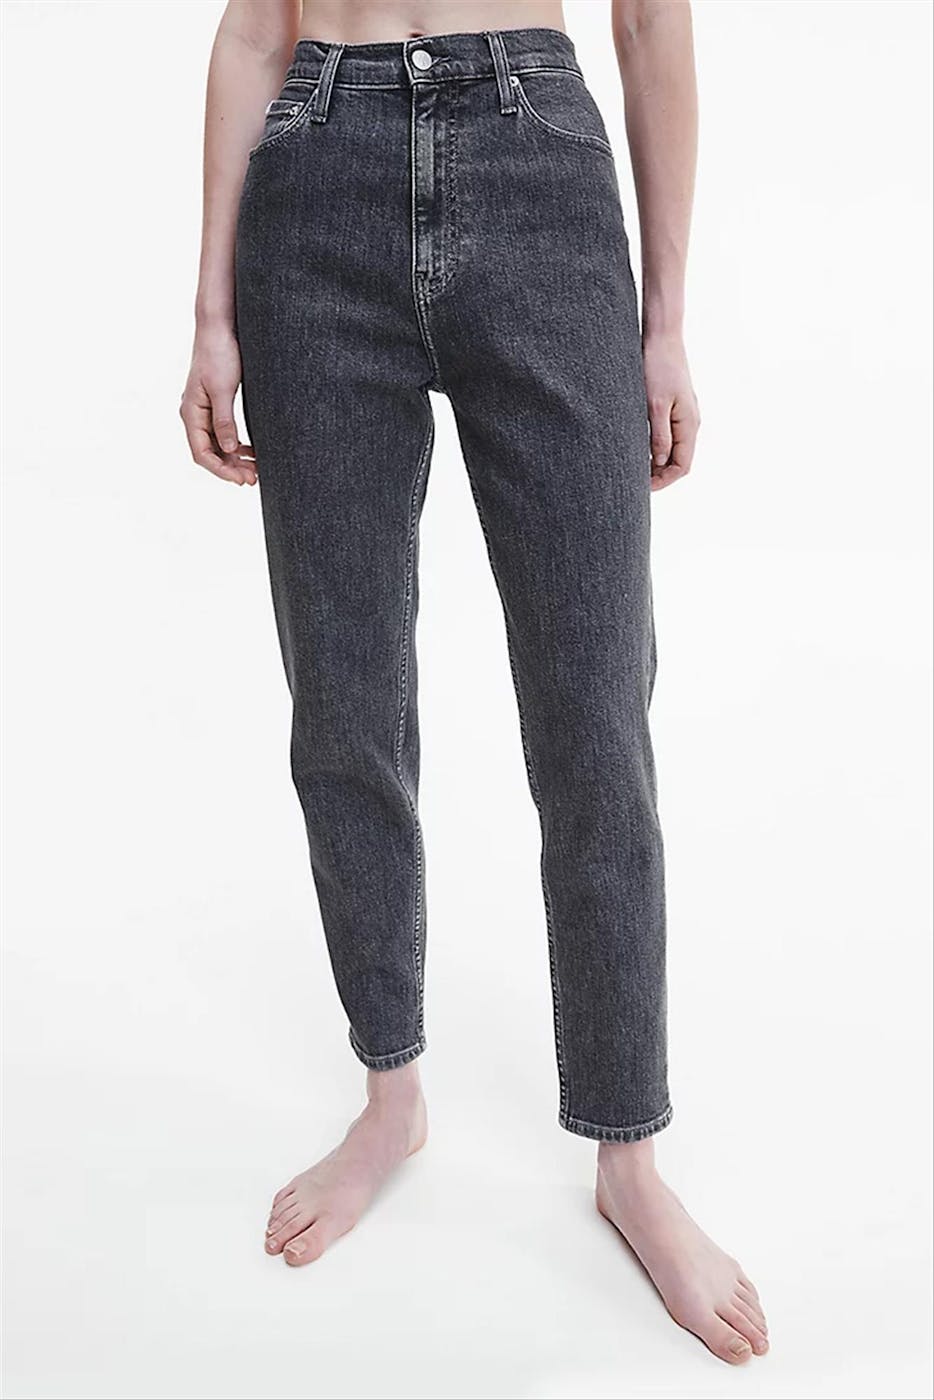 Calvin Klein Jeans - Donkergrijze Tapered Mom jeans